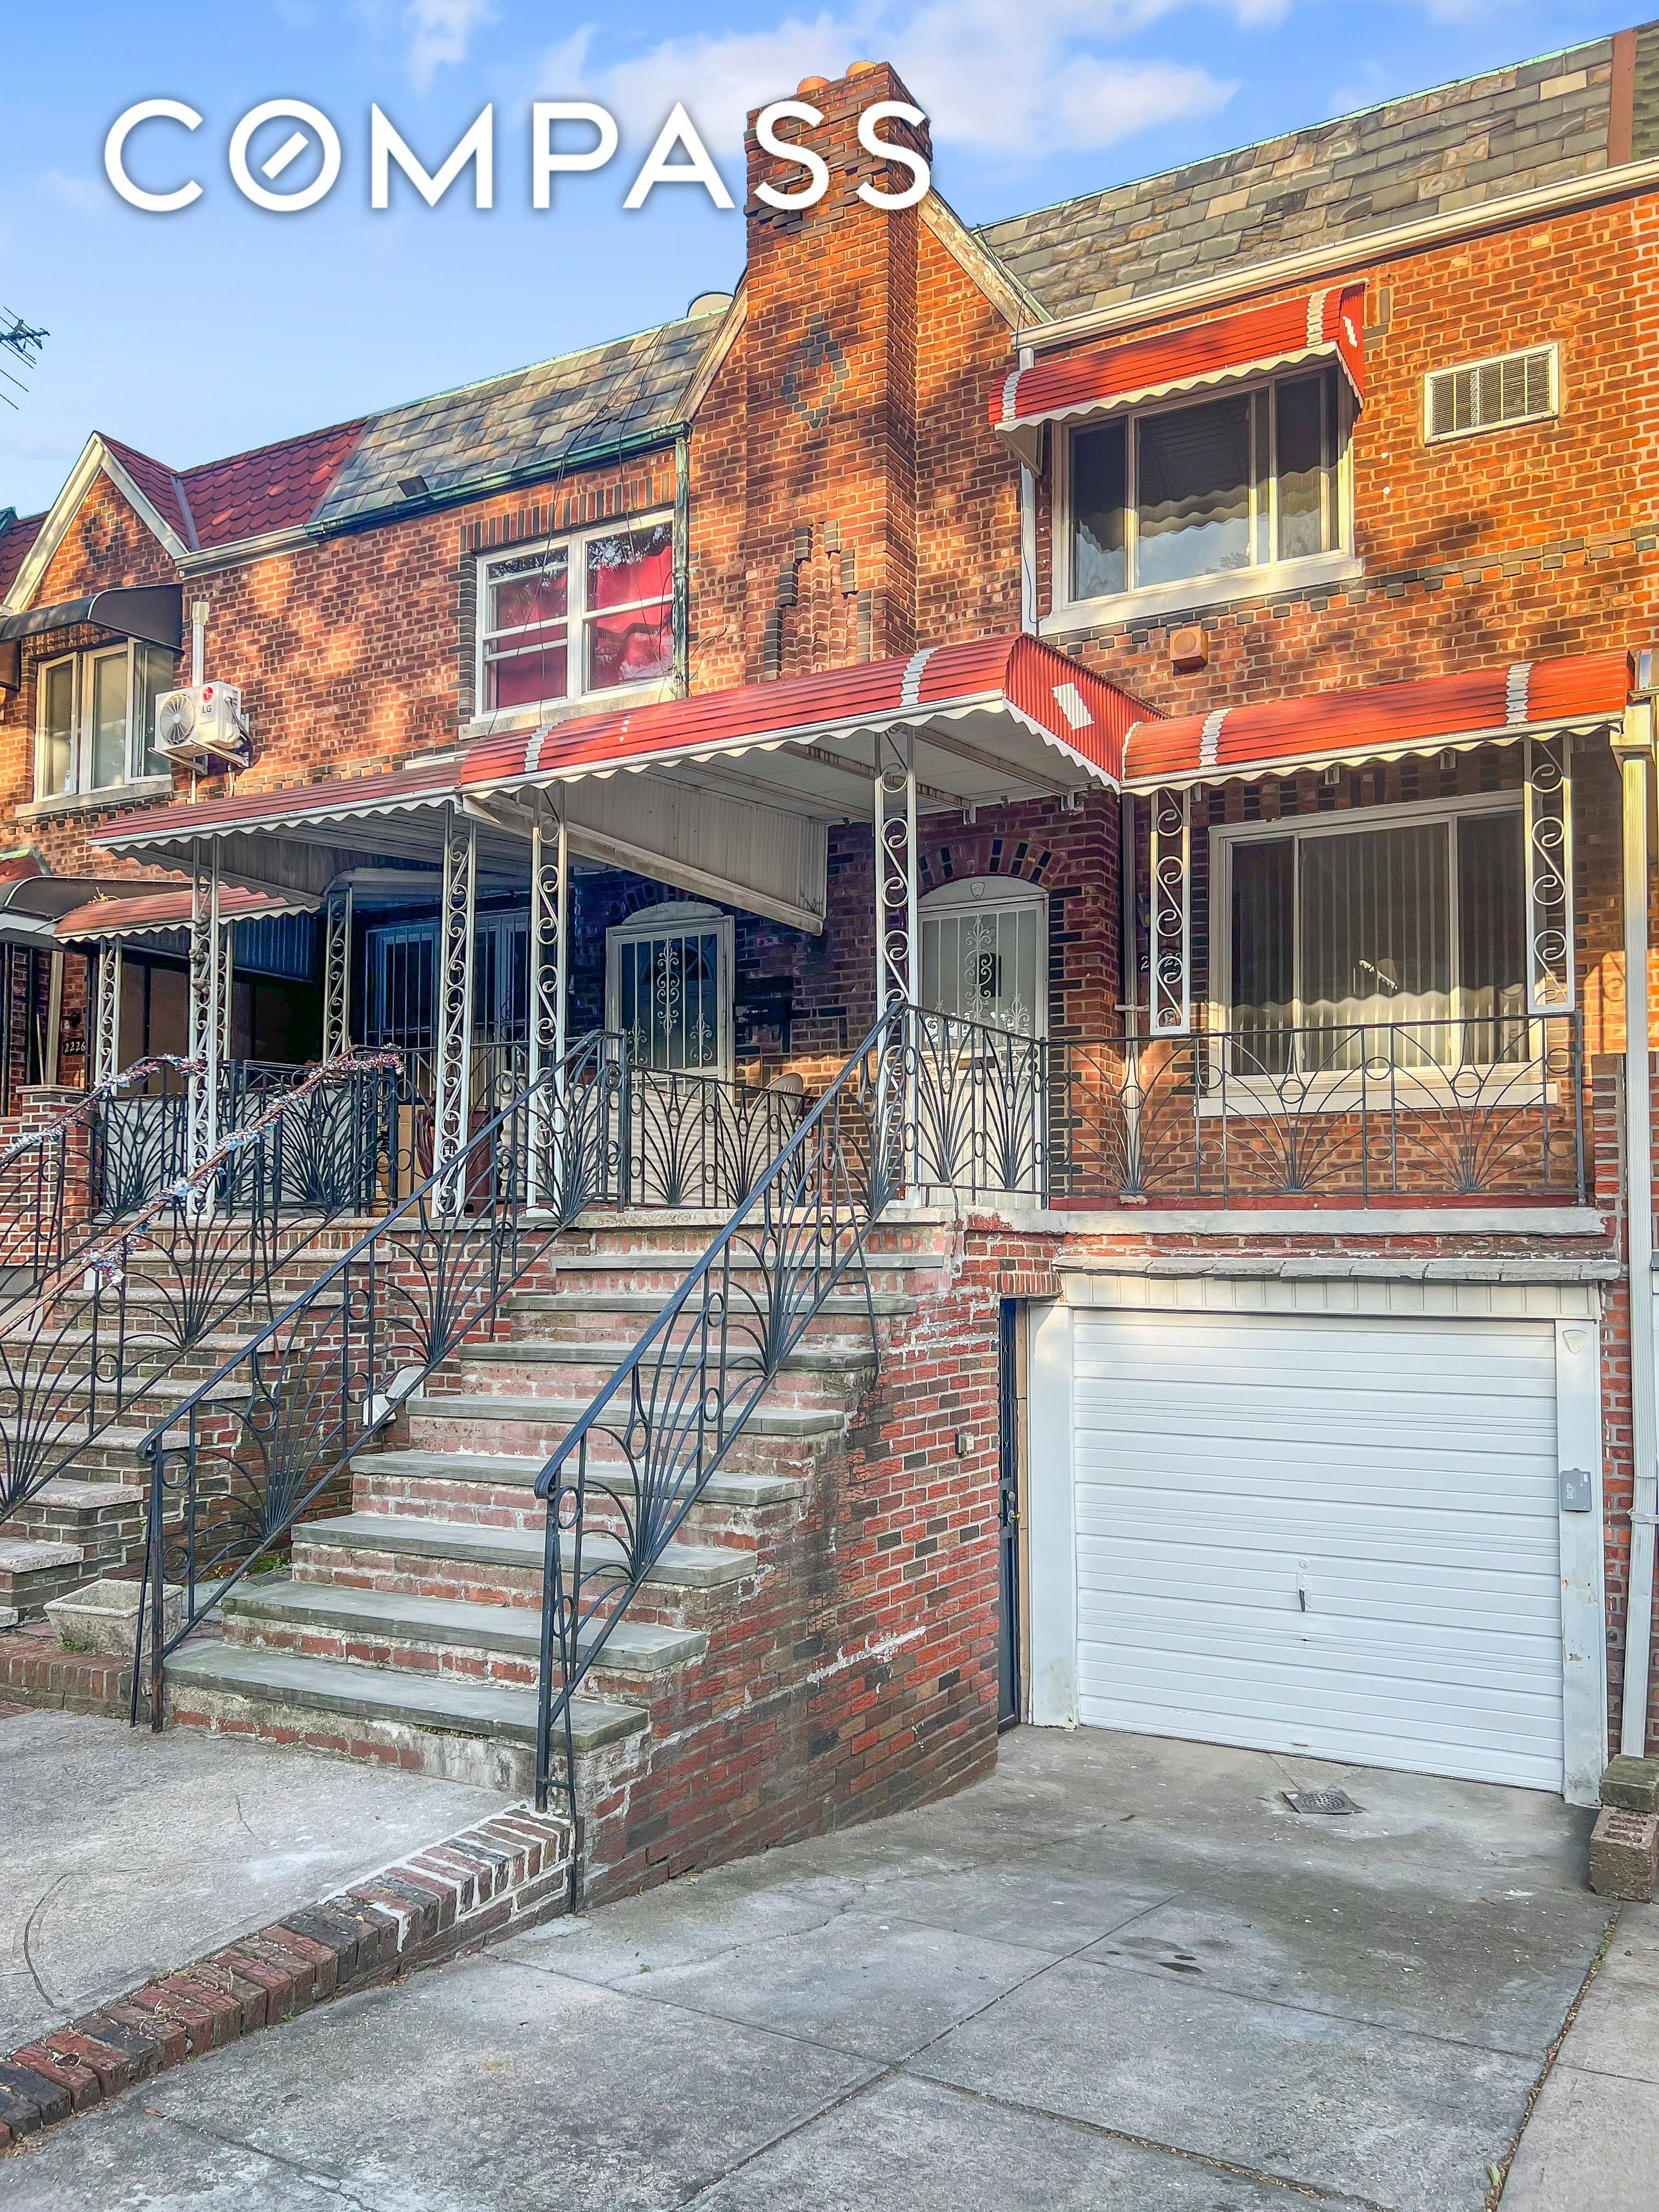 Beautiful one family brick home with attached garage amp ; private driveway on a quiet block in the heart of Sheepshead Bay.